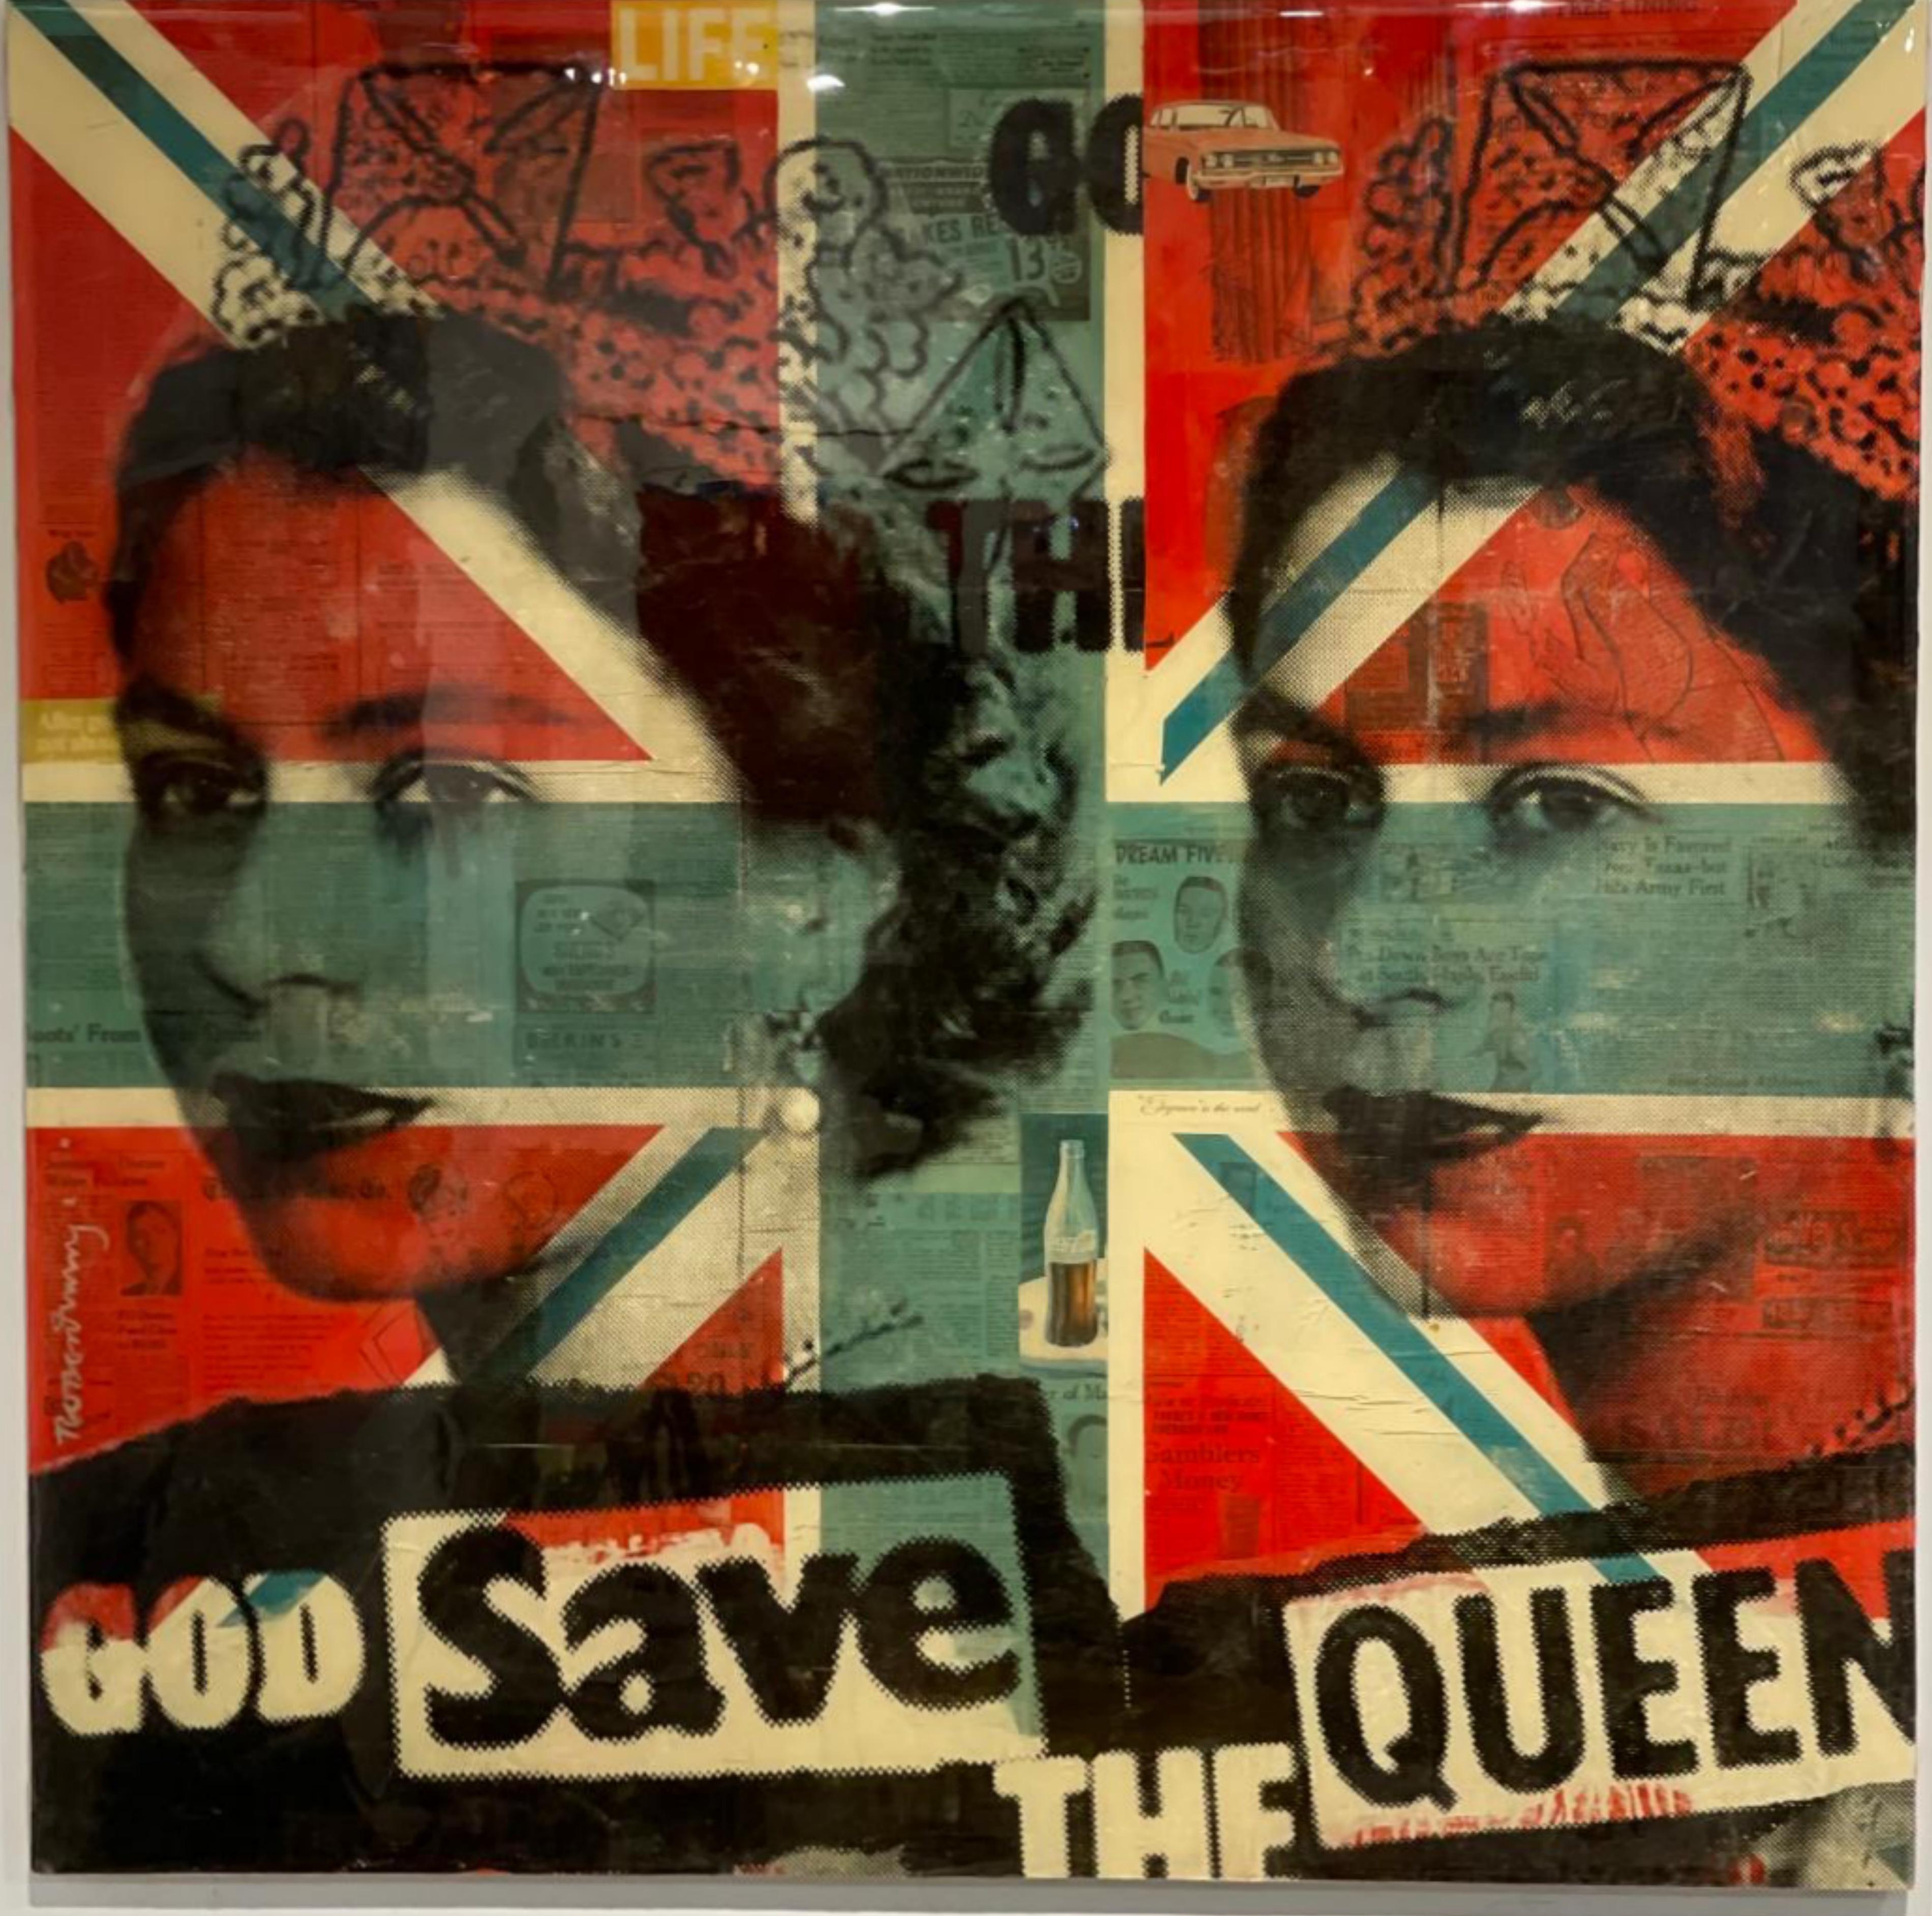 God Save the Queen 3